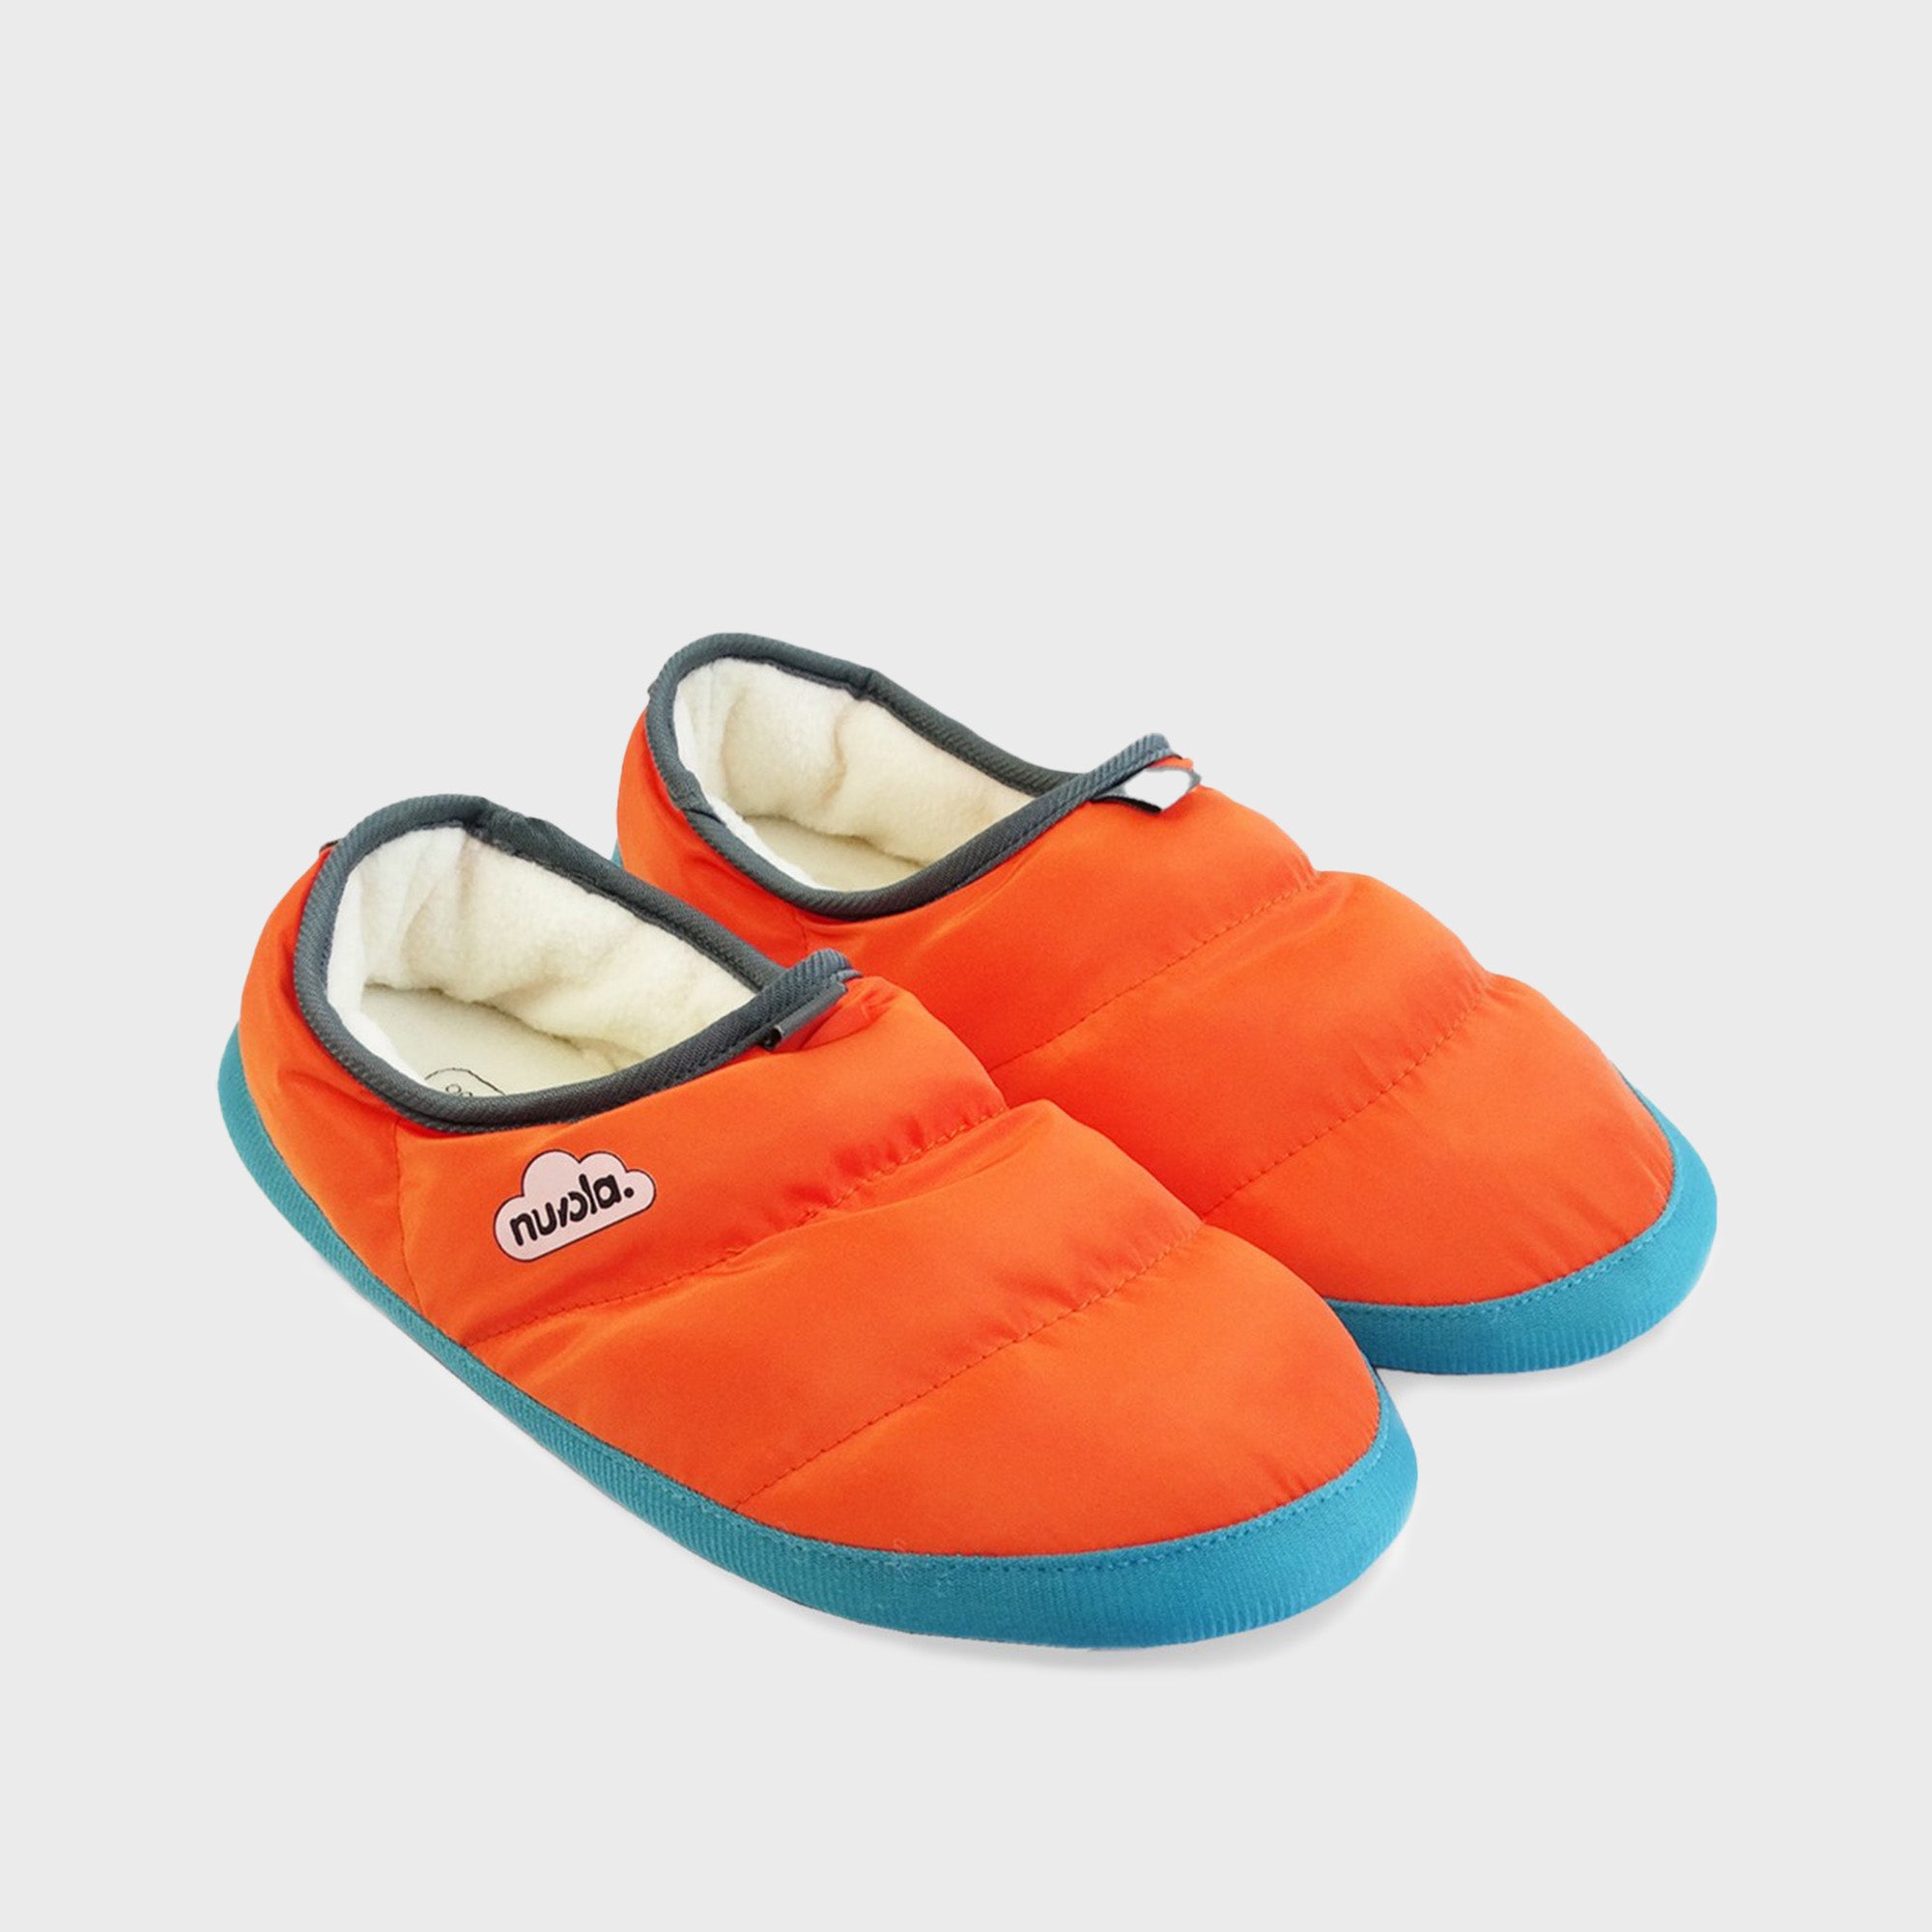 Nuvola Classic Party Slippers in Orange CNCLPRTY13 FROM EIGHTYWINGOLD - OFFICIAL BRAND PARTNER